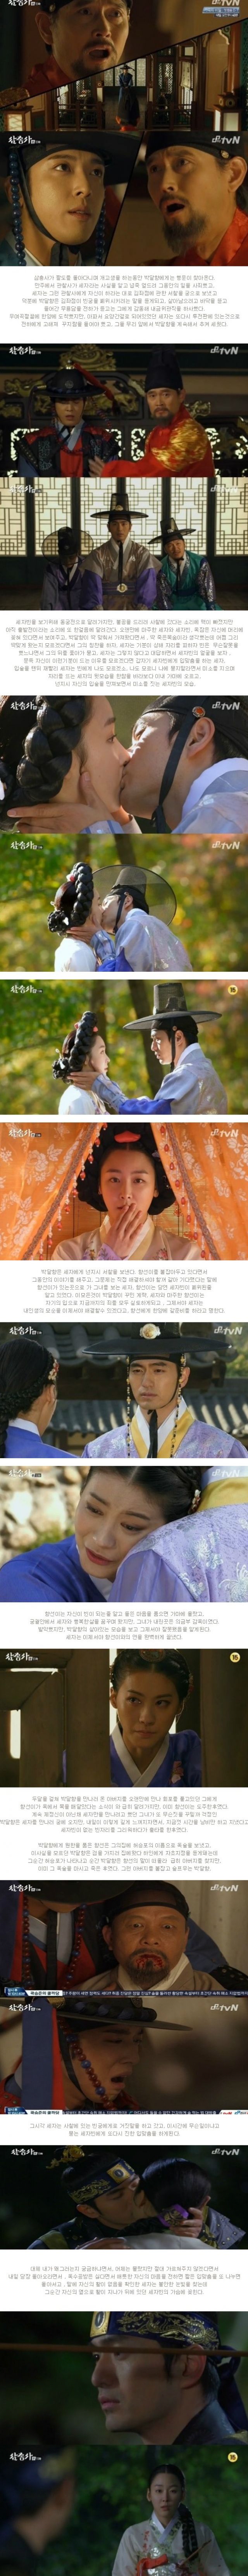 episode 11 captures for the Korean drama 'The Three Musketeers - Drama'